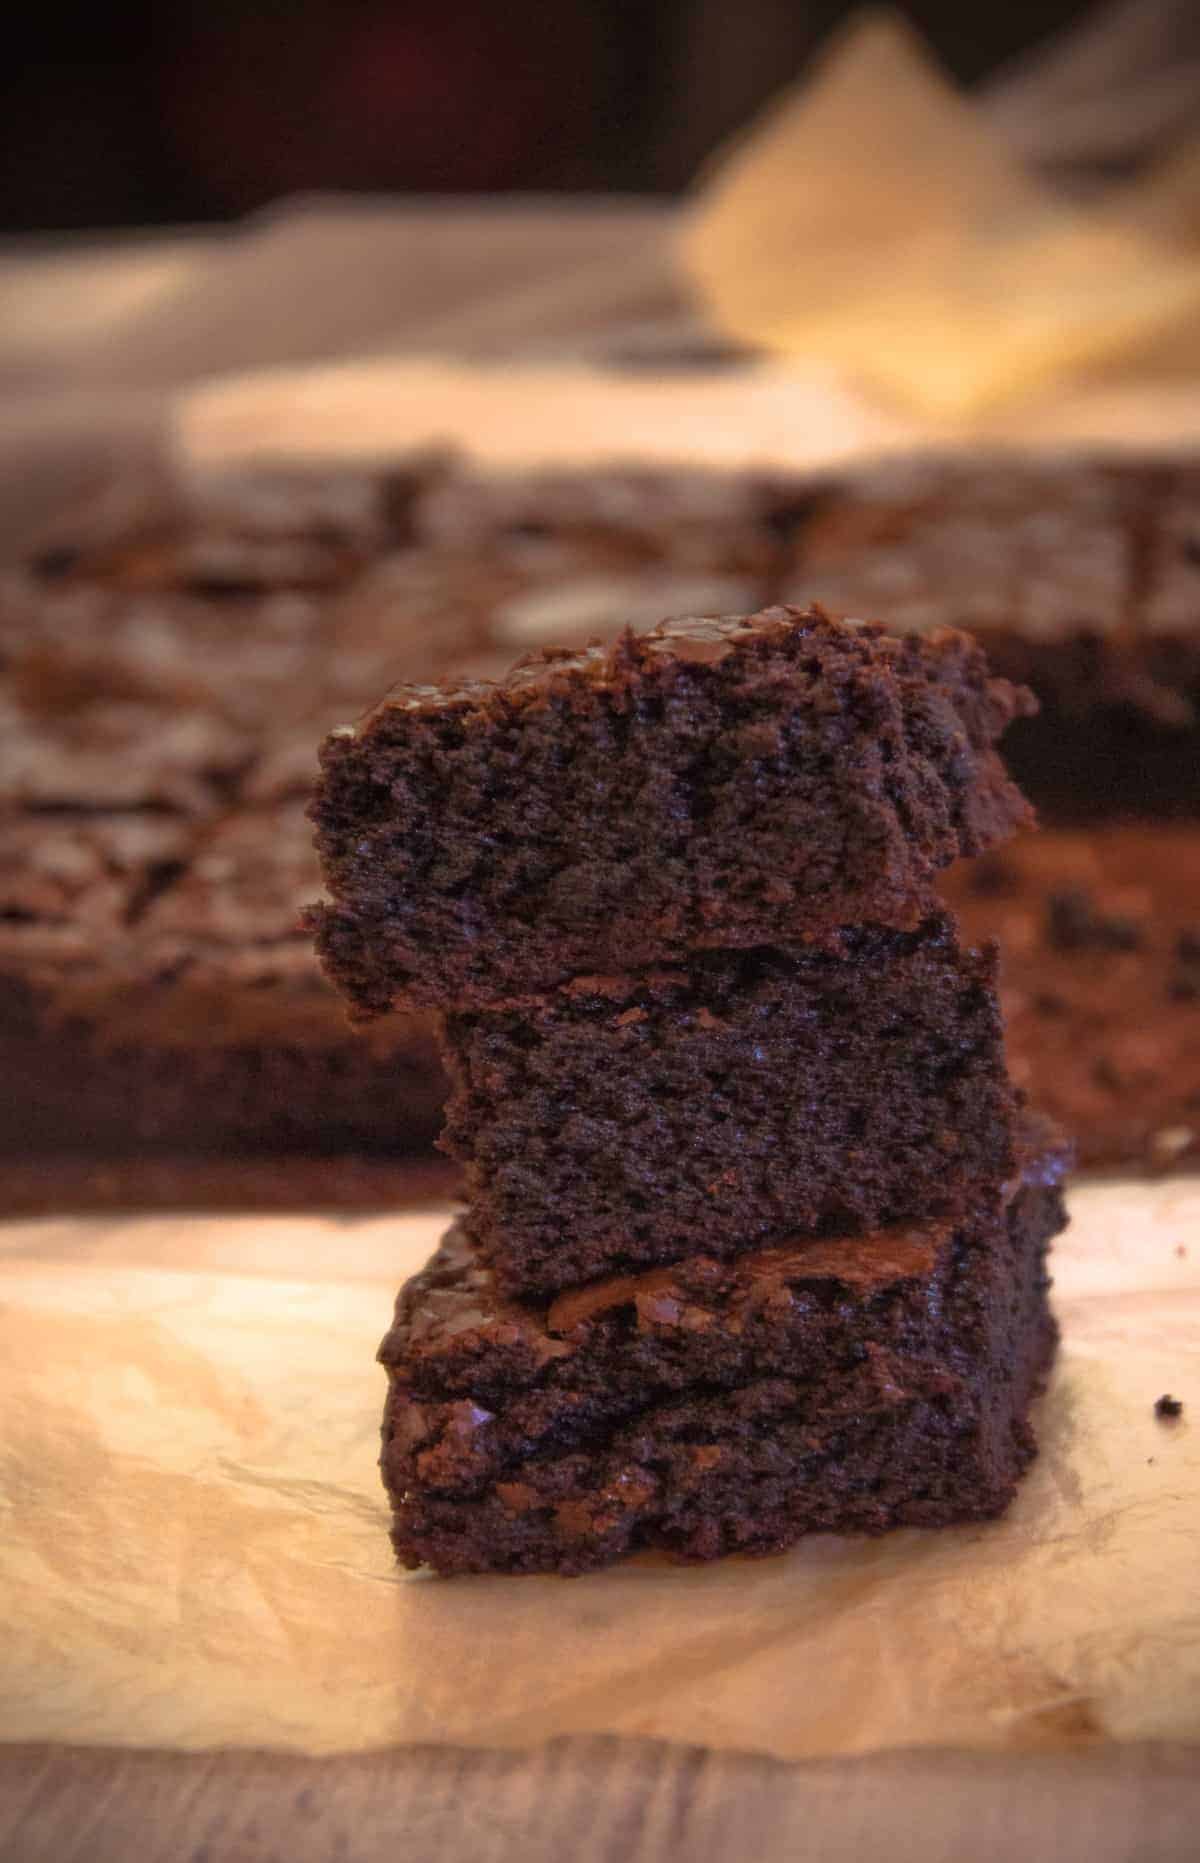 Dreamy brownie made with oil.